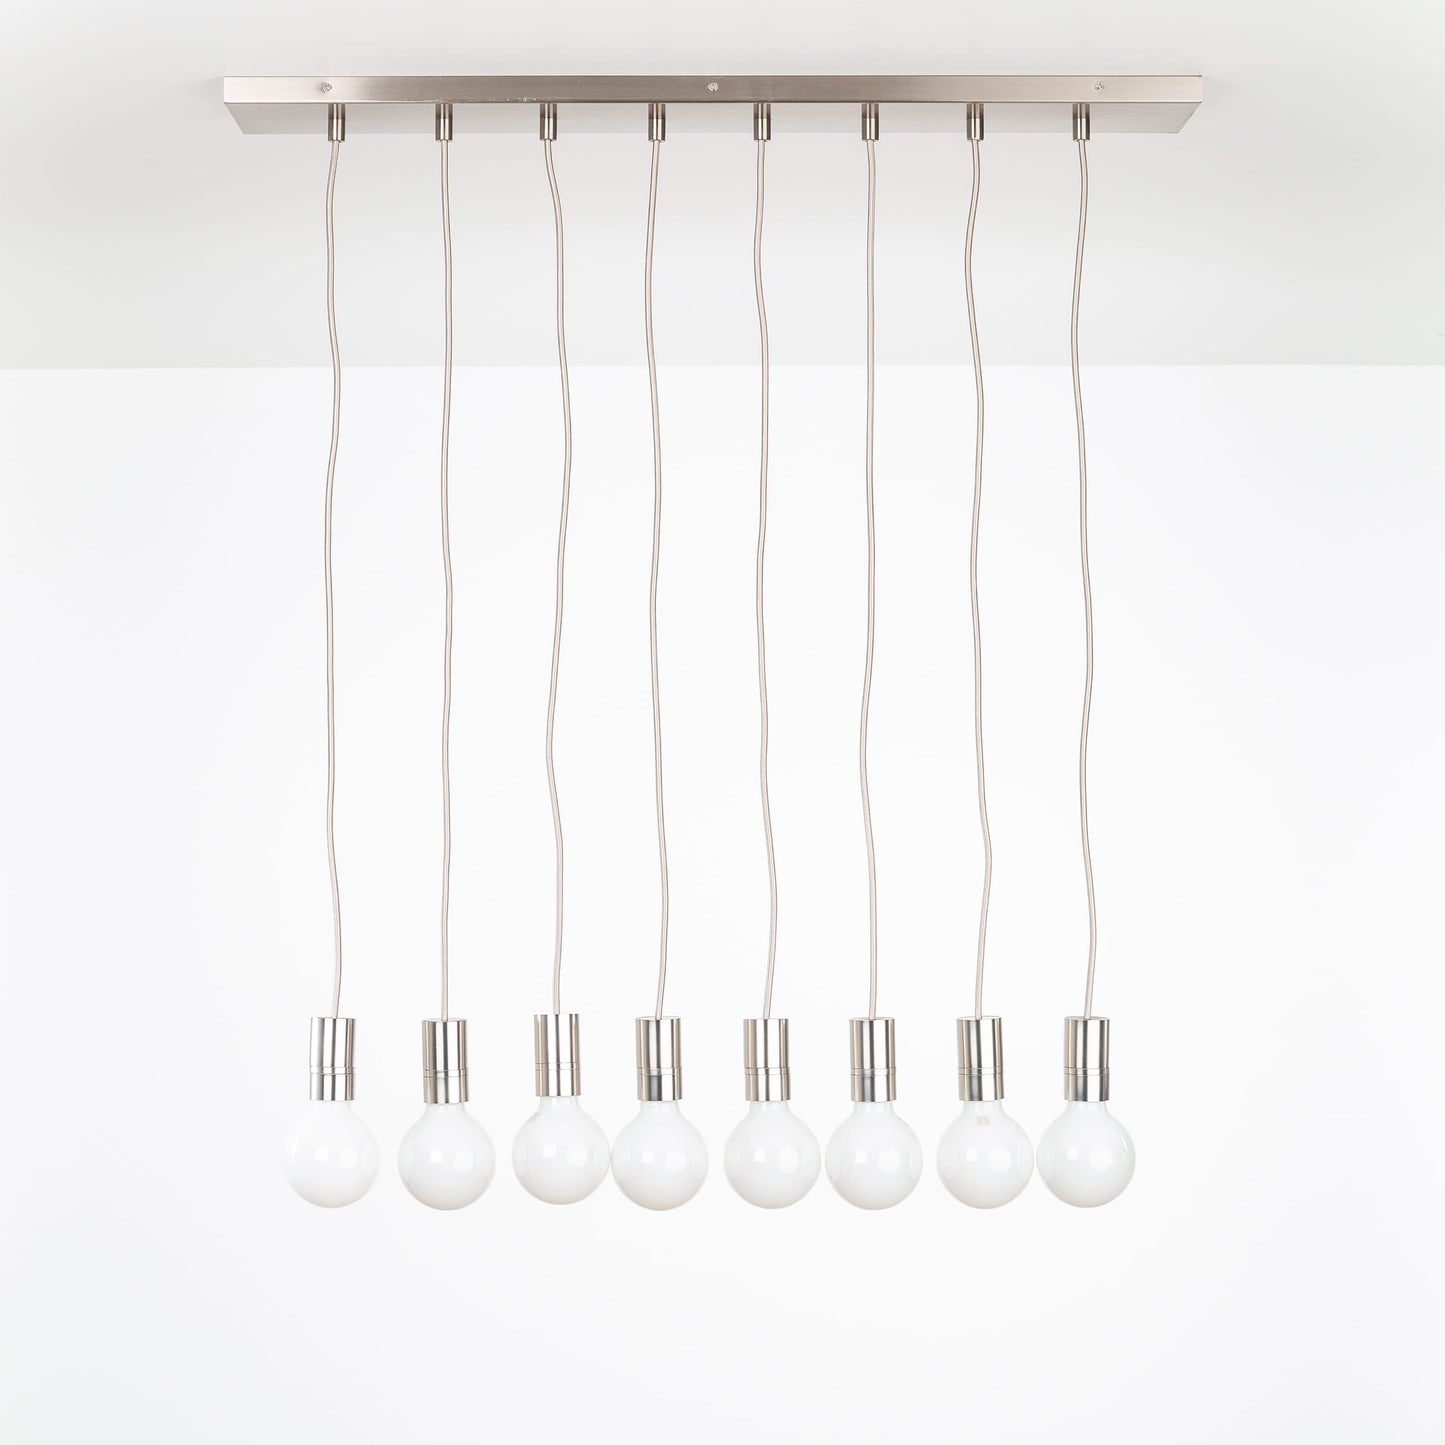 AiO (All-in-One) 8-Line Chandelier